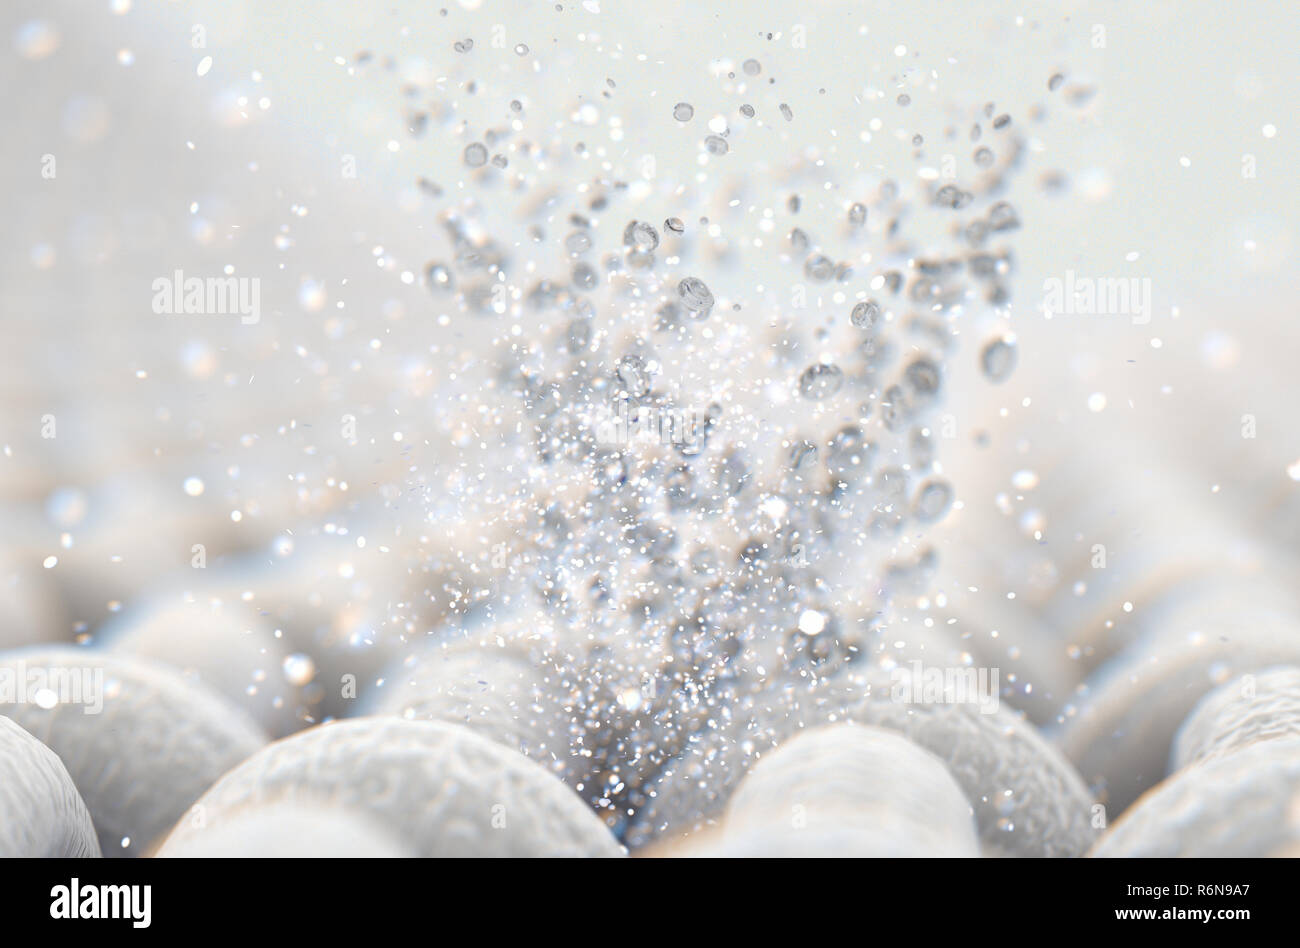 A microscopic close up view of a simple woven textile and a visible water bubbles  - 3D render Stock Photo